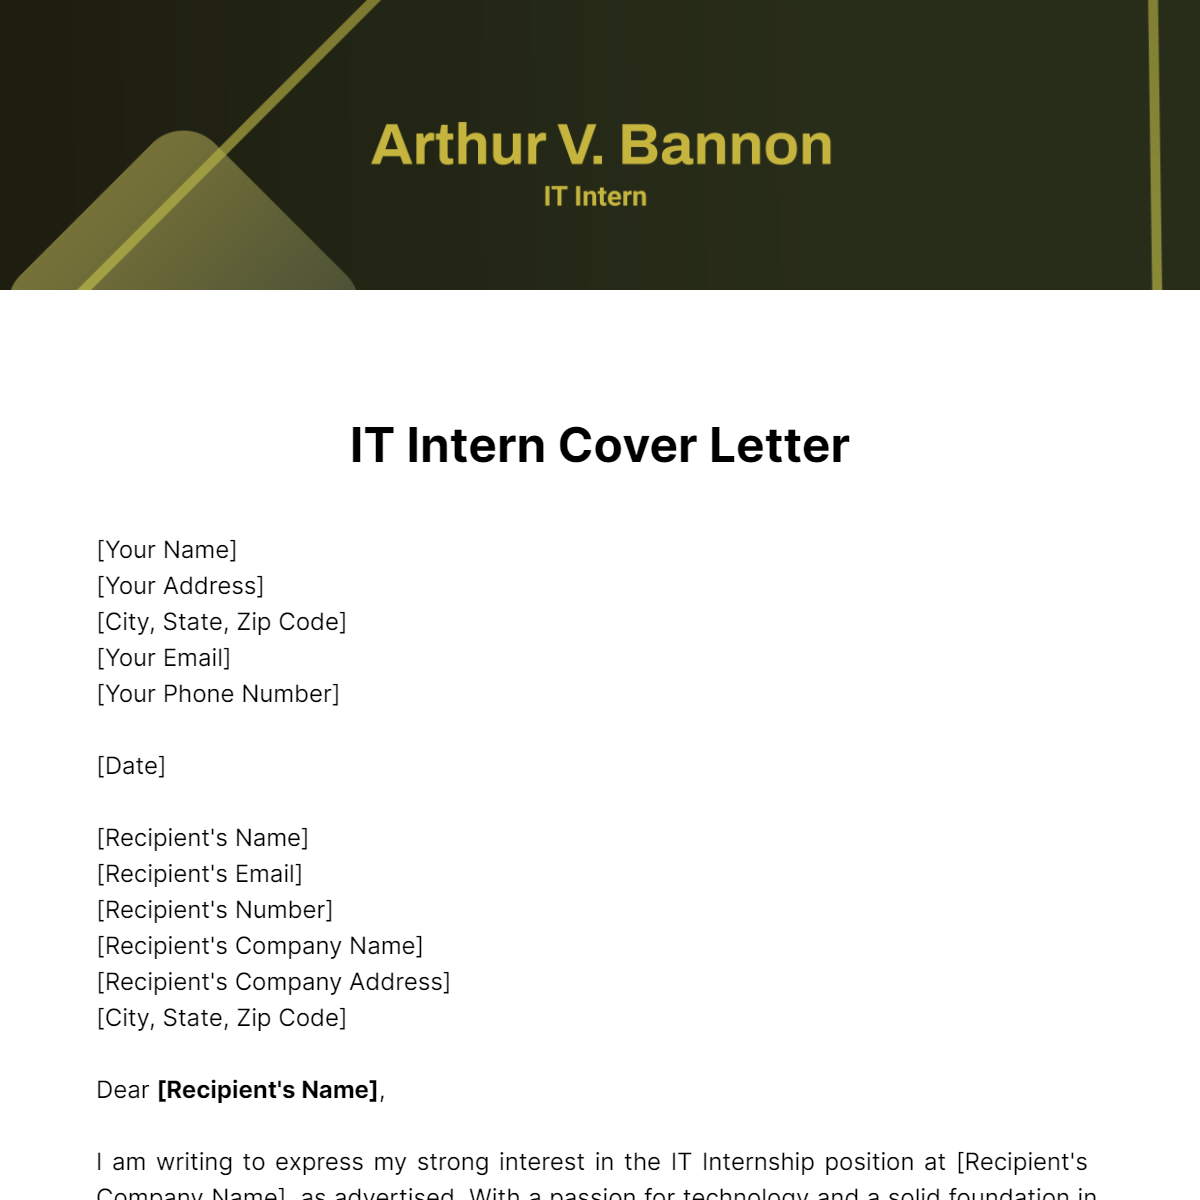 IT Intern Cover Letter Template